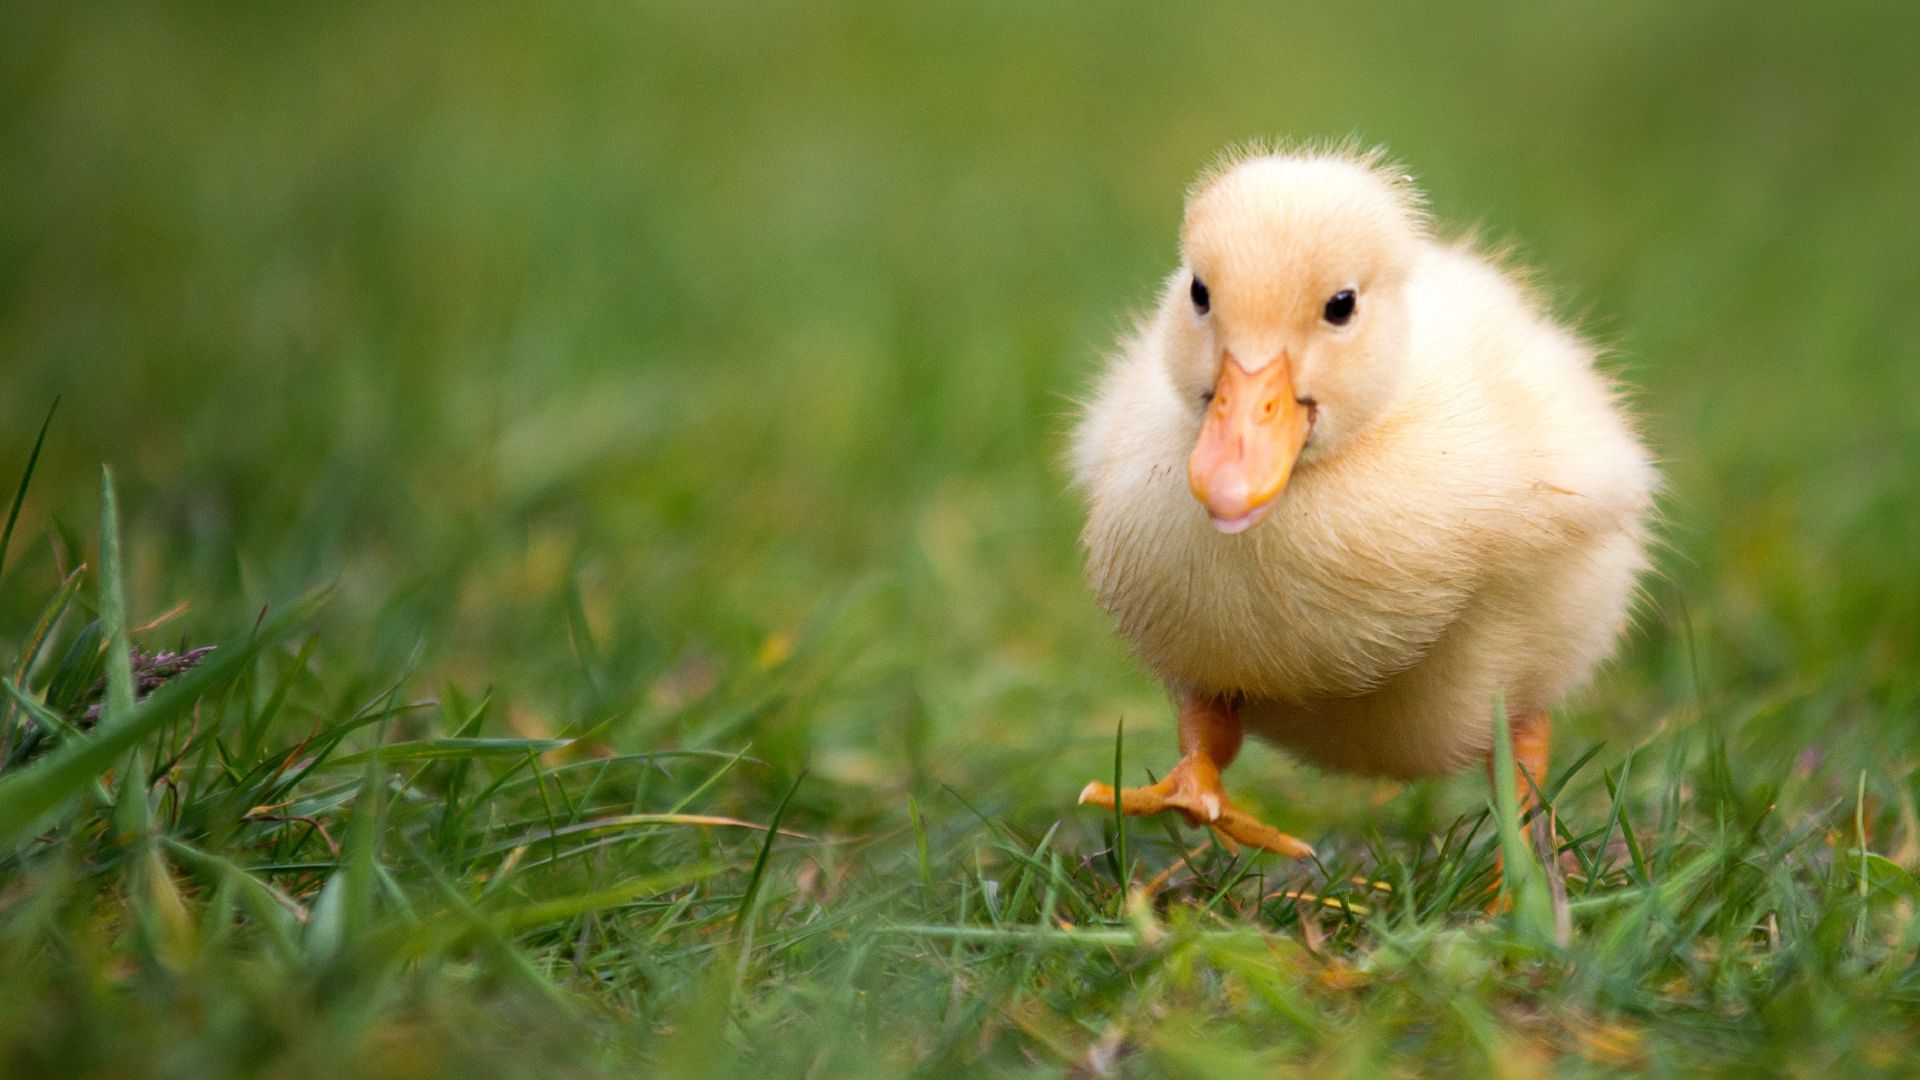 Cover photo of a duckling running on grass